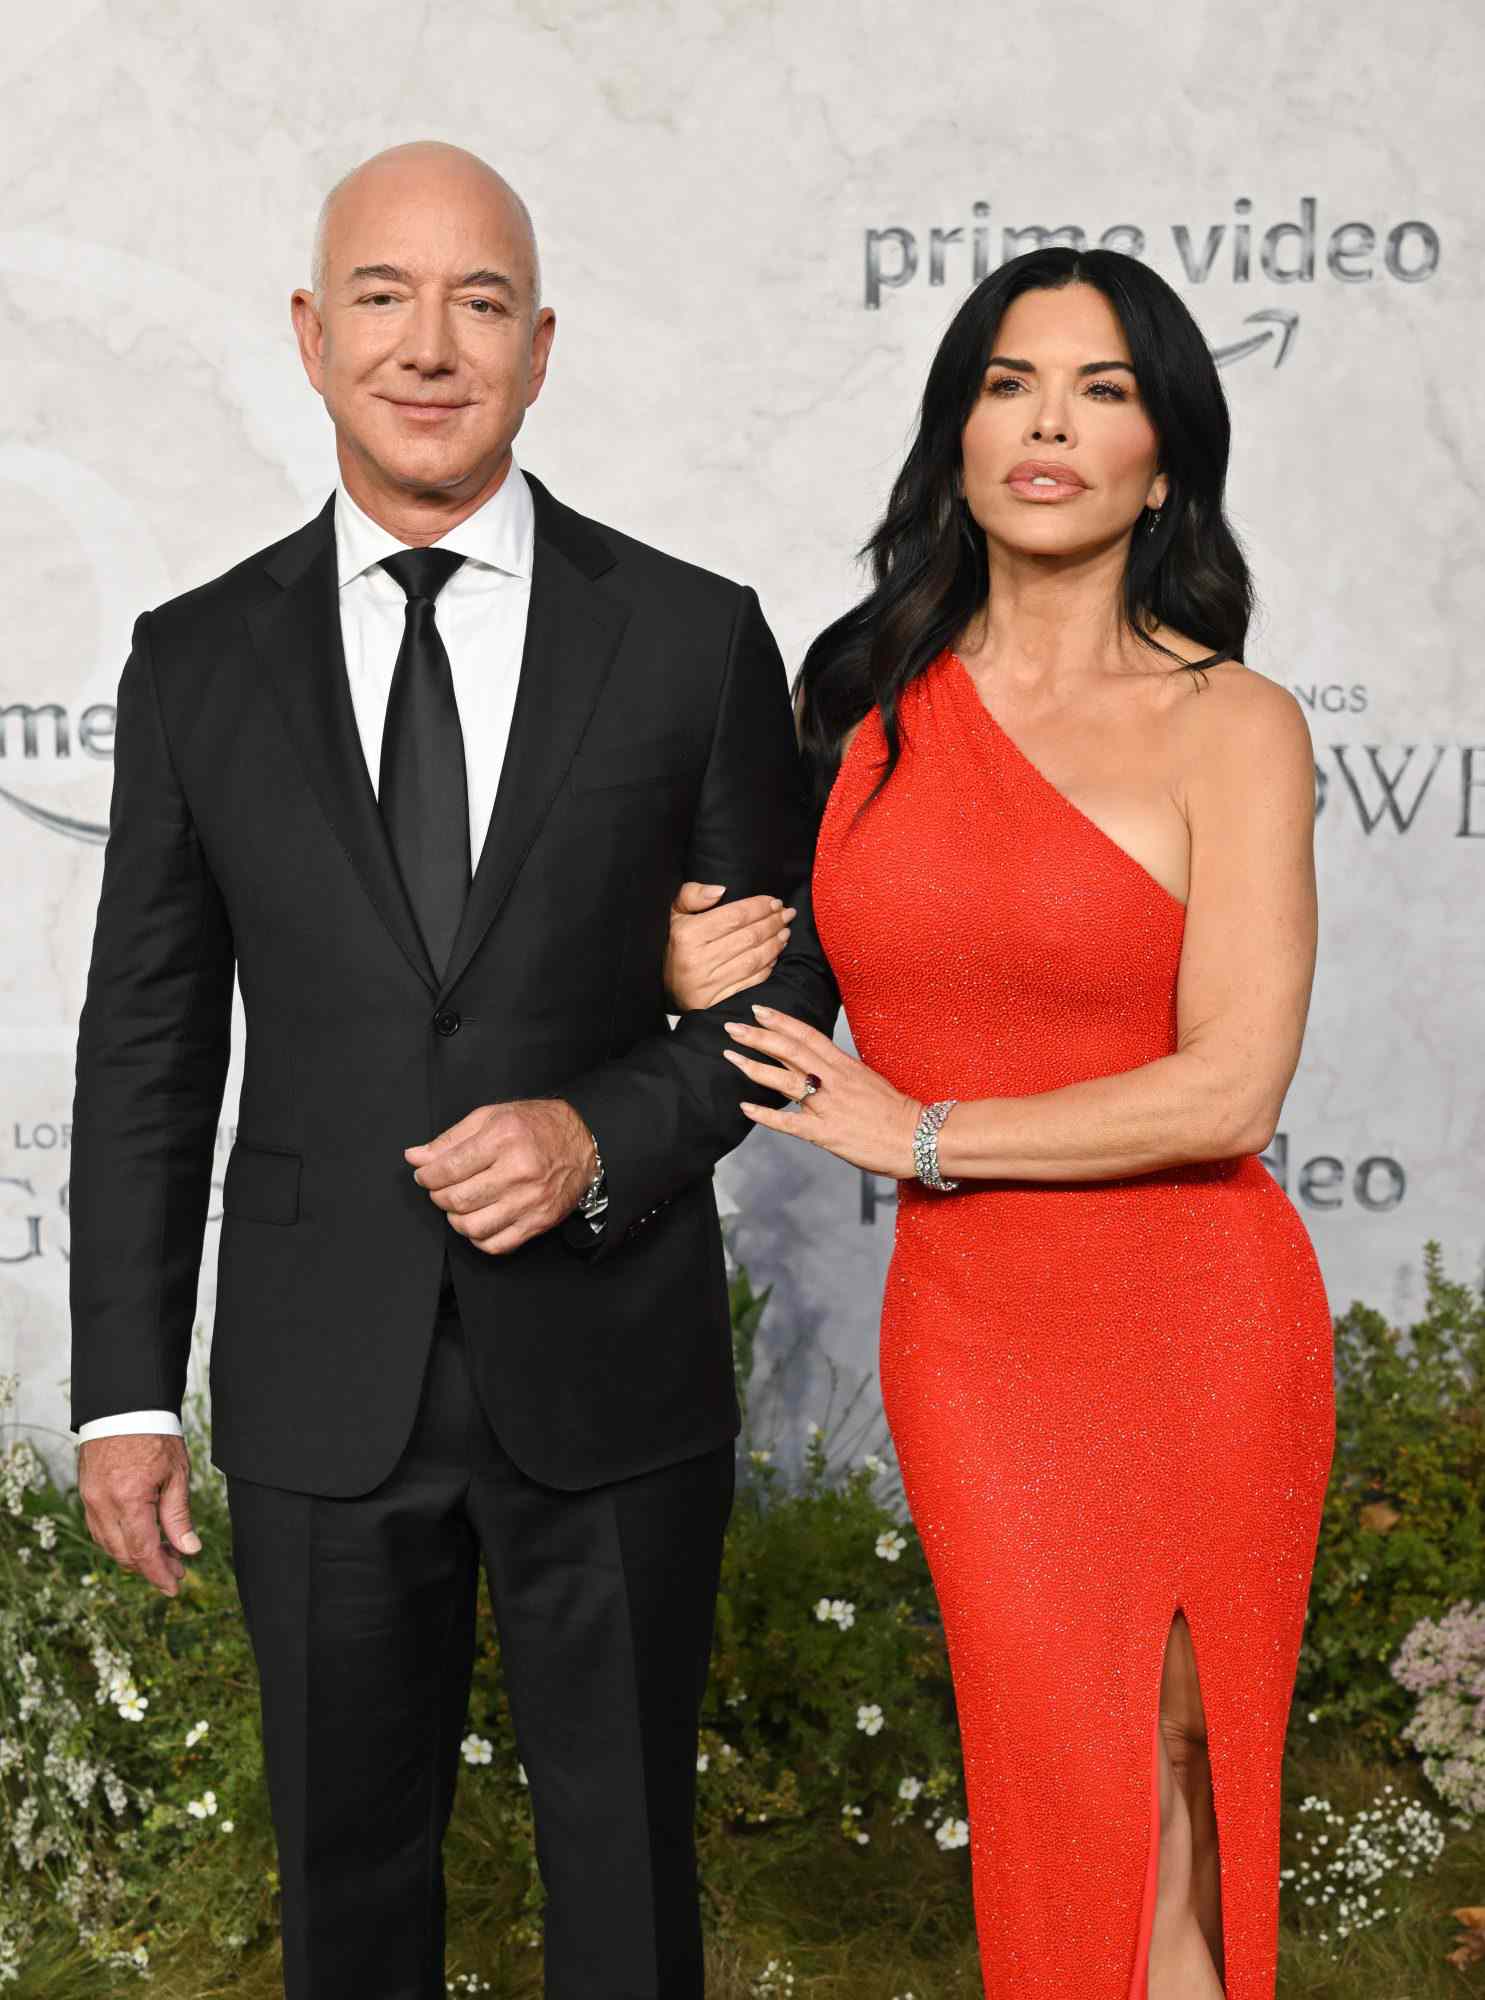 Lauren Sanchez and Jeff Bezos "The Lord Of The Rings: The Rings Of Power" World Premiere – Arrivals